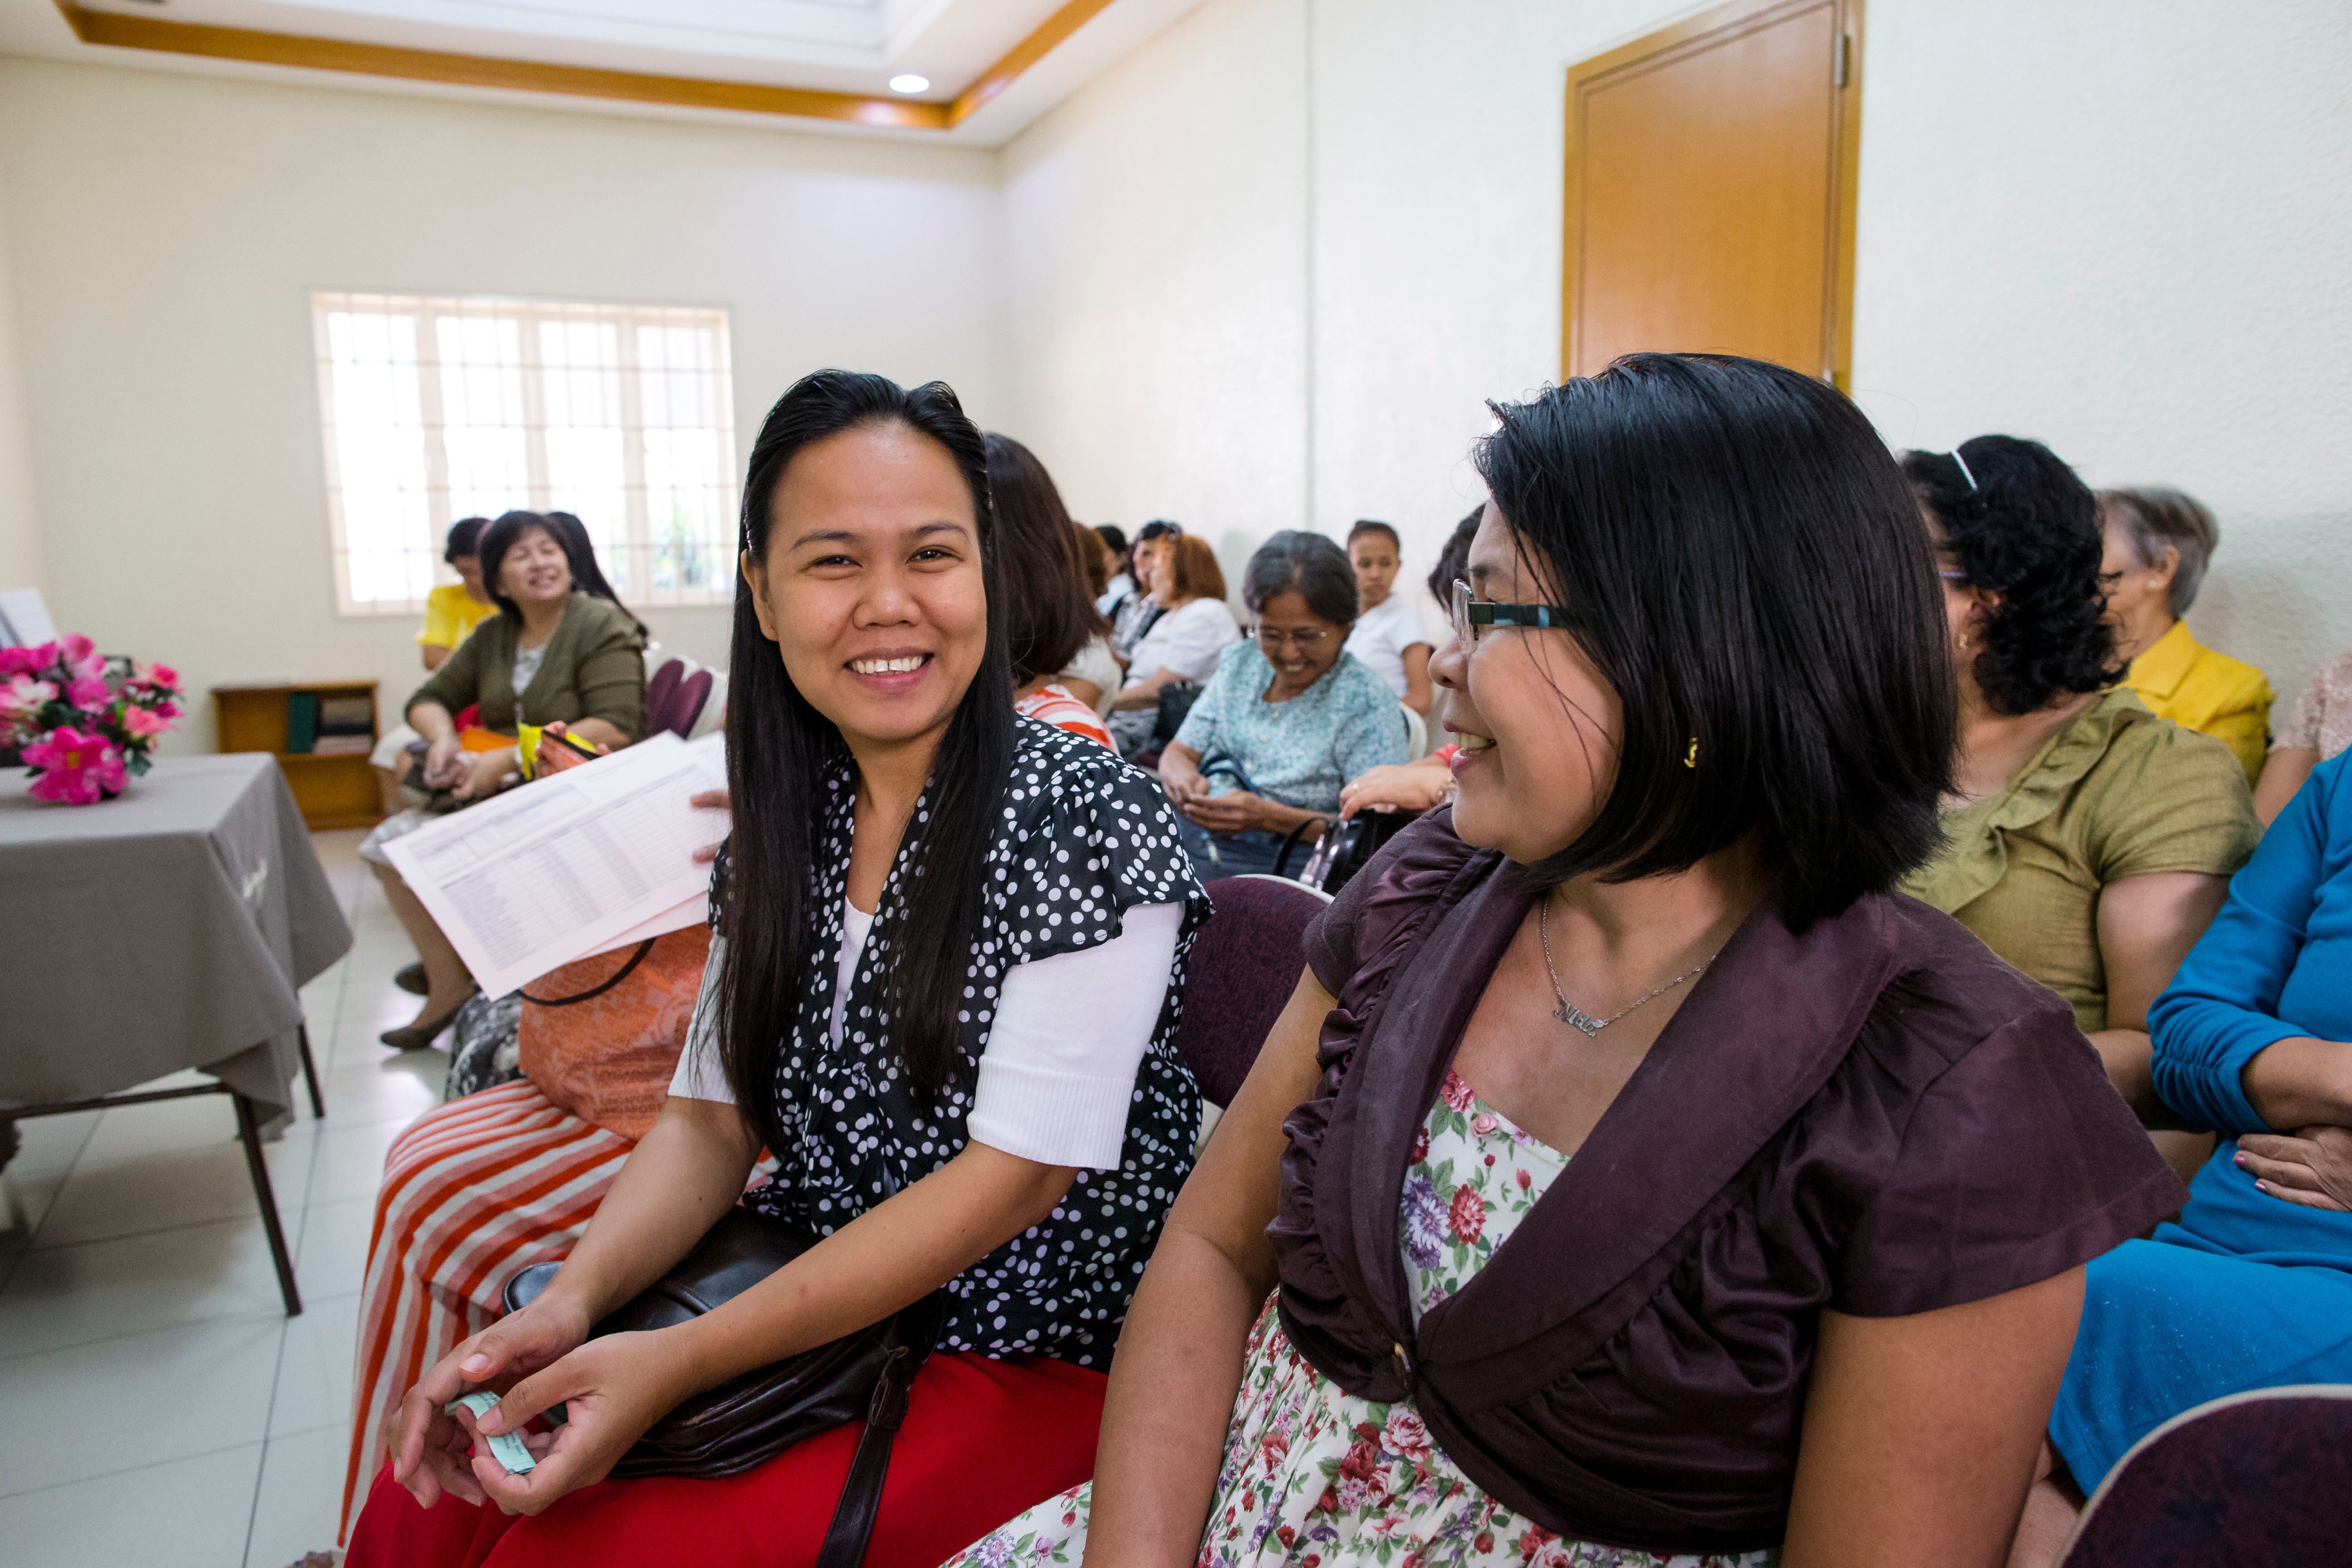 A group of Relief Society sisters in the Philippines talk together in their meetinghouse.